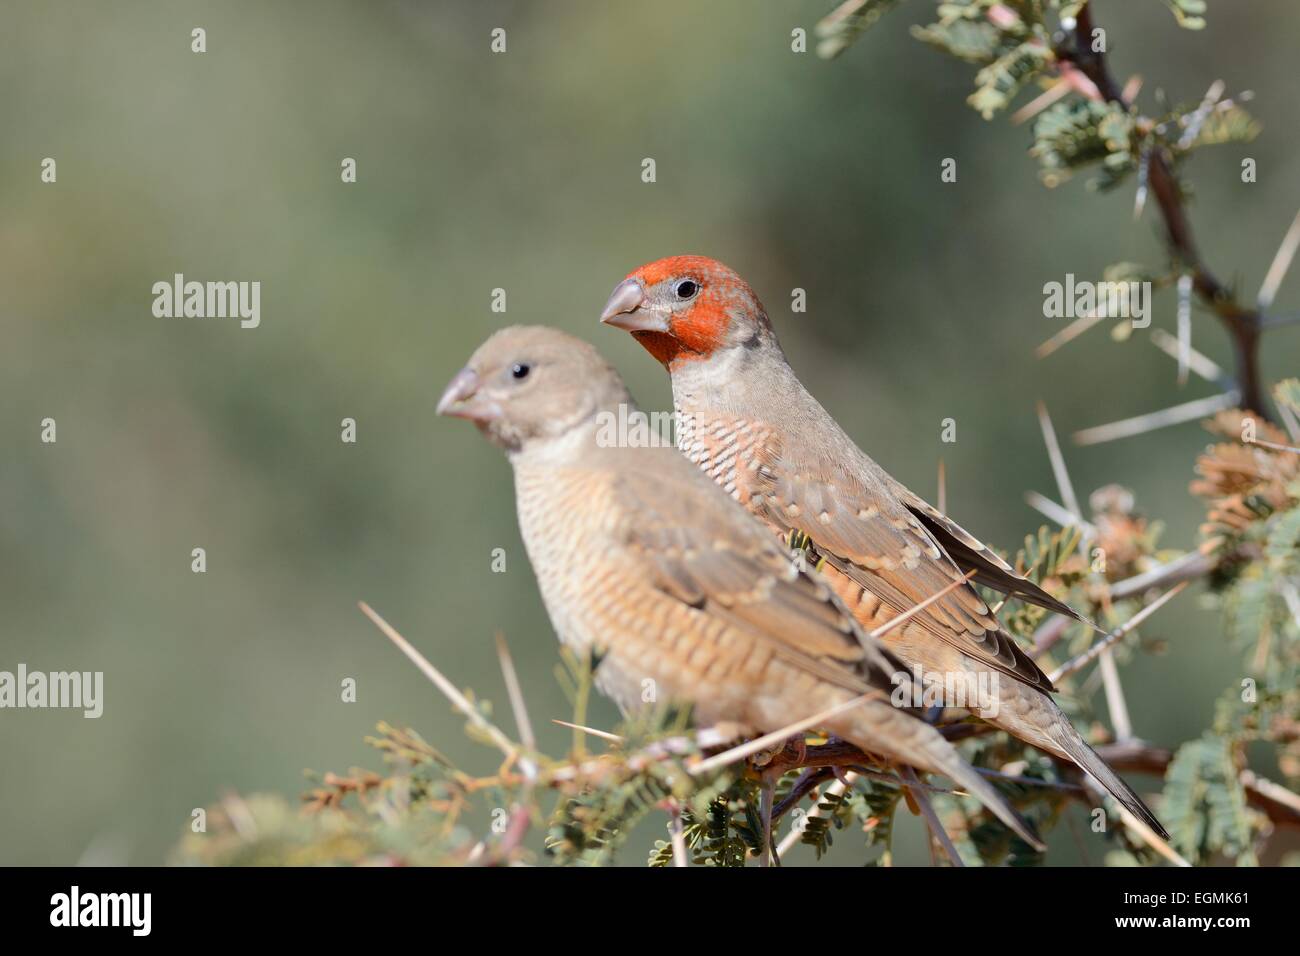 Red-headed Finches (Amadina erythrocephala), female and male, Kgalagadi Transfrontier Park, Northern Cape, South Africa, Africa Stock Photo